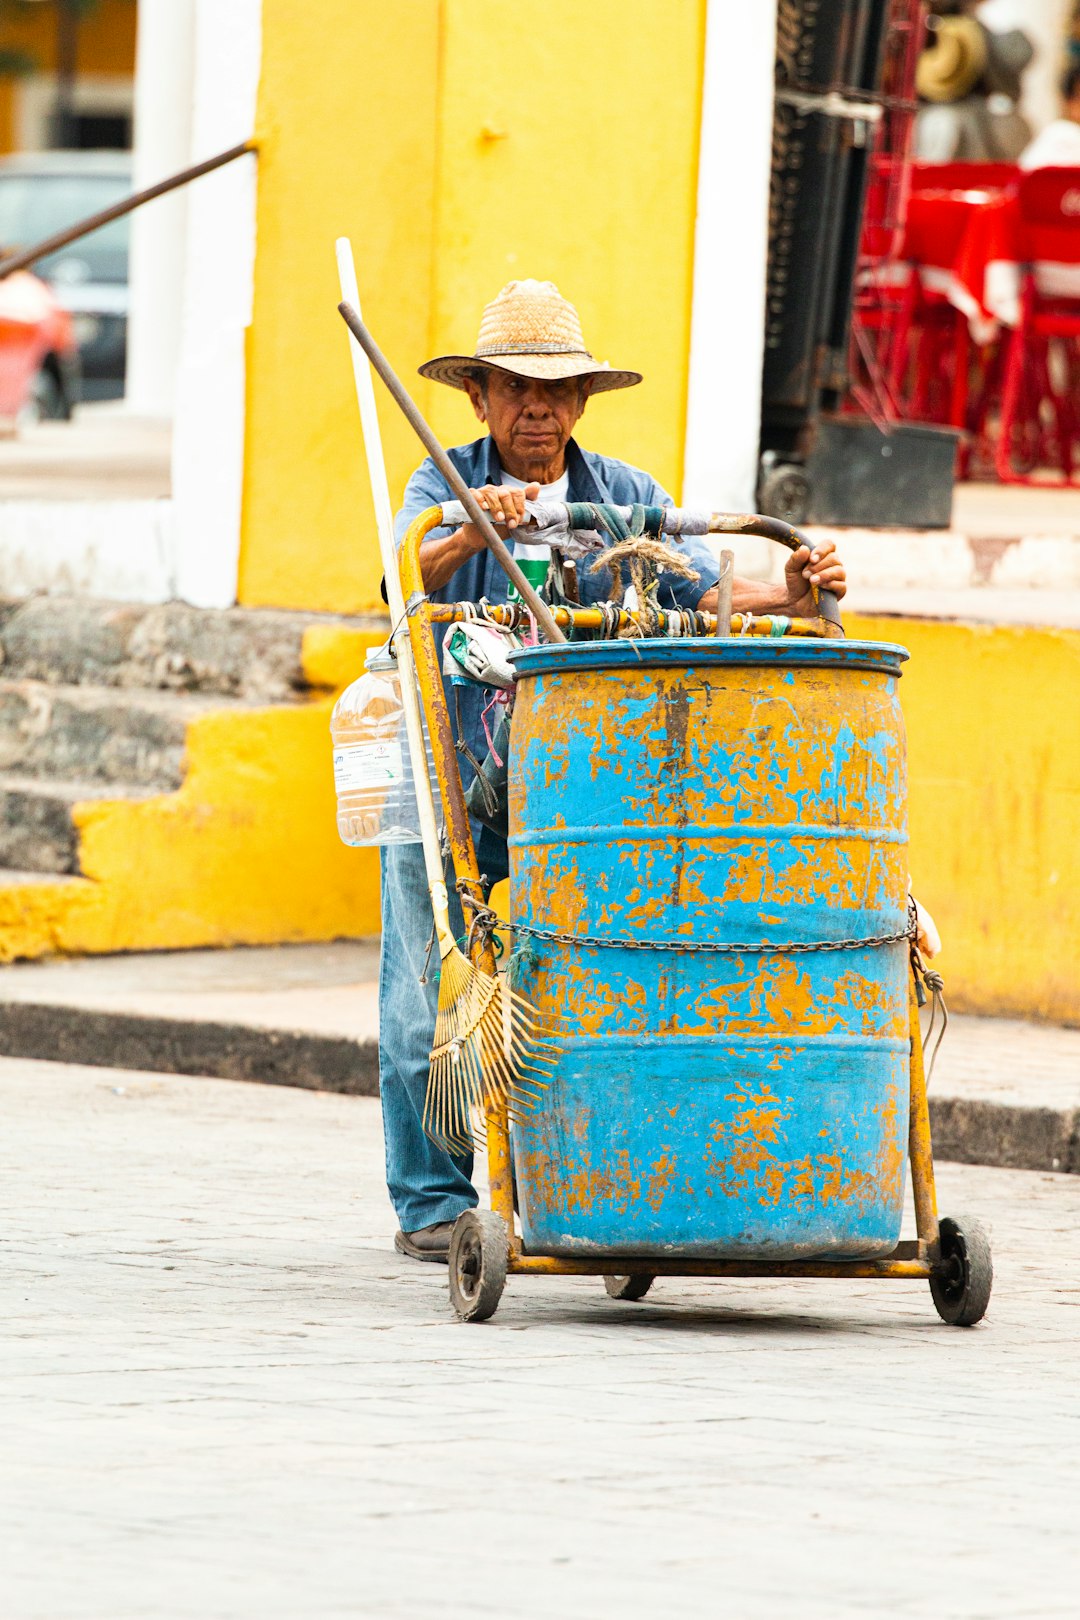 man in brown hat riding blue and yellow cart